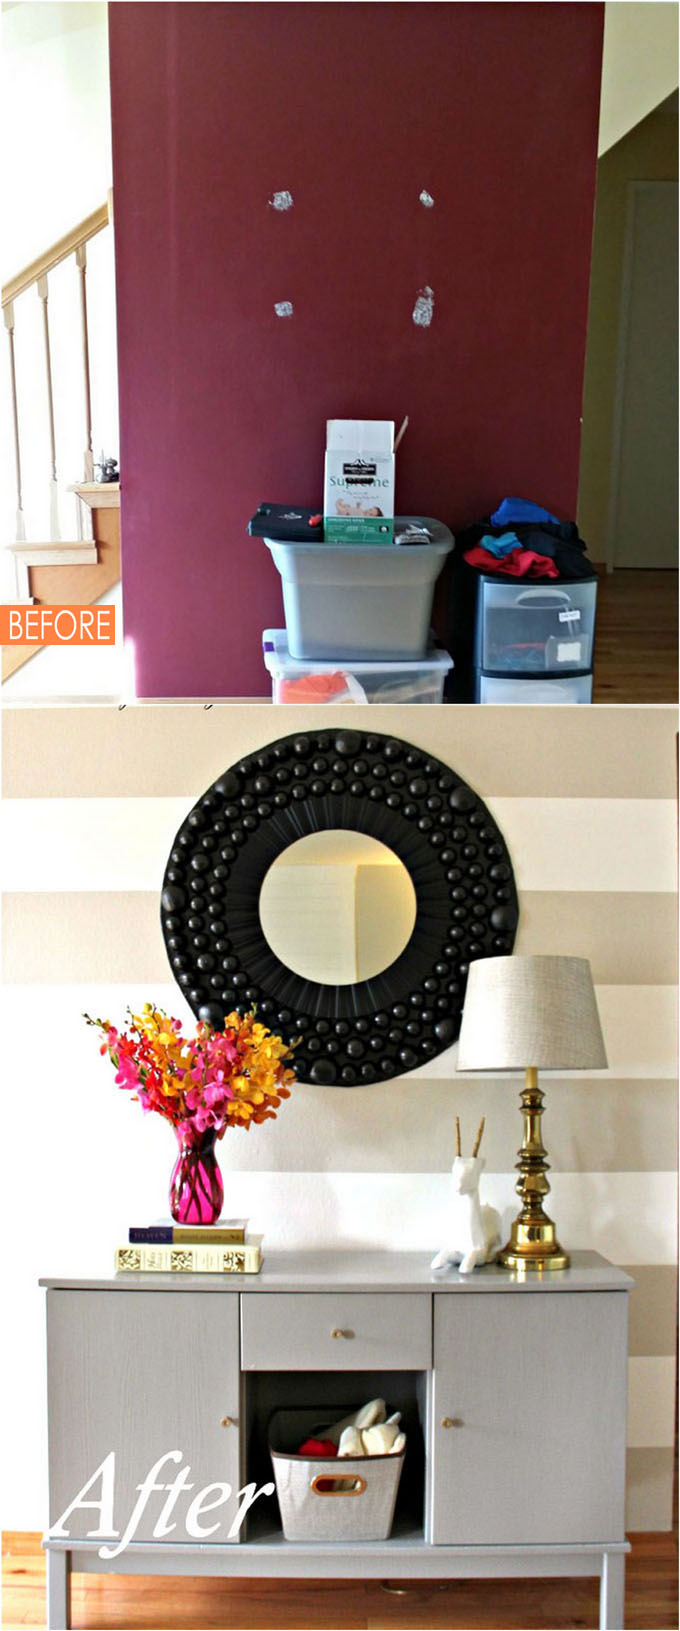 20-entryway-before-after-apieceofrainbowblog-4